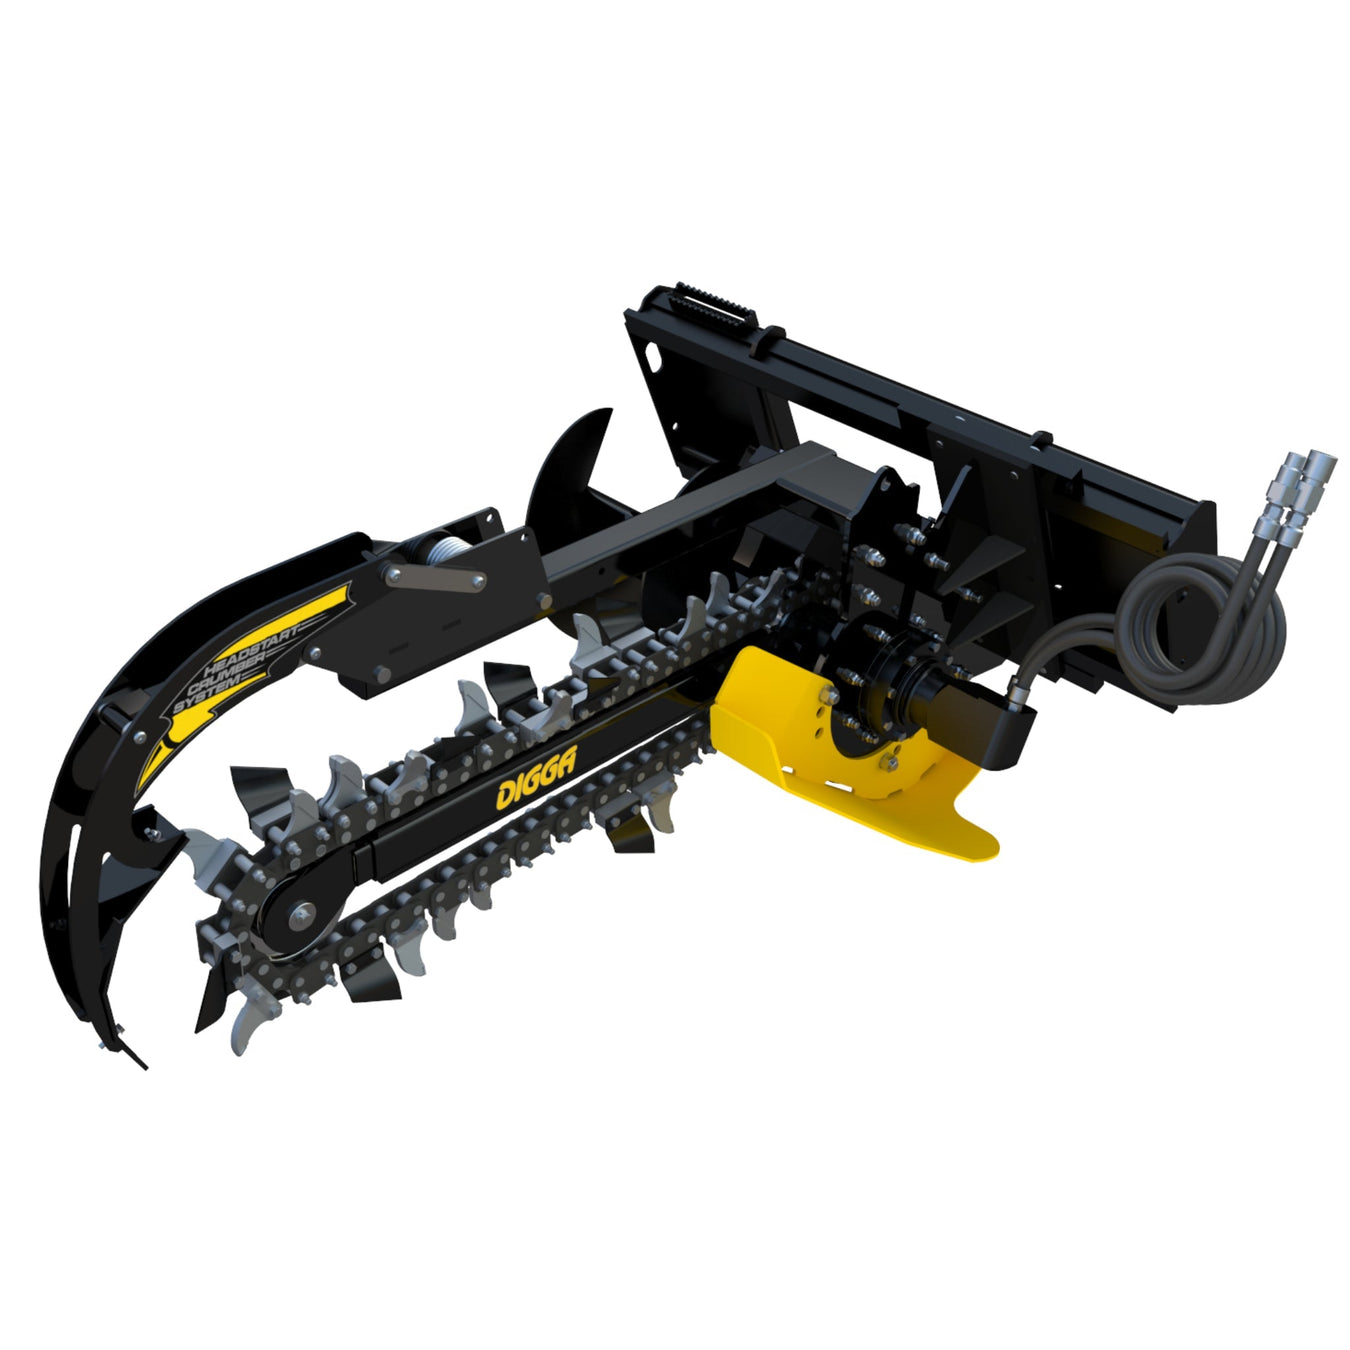 Skid Steer Trencher by Digga Attachments